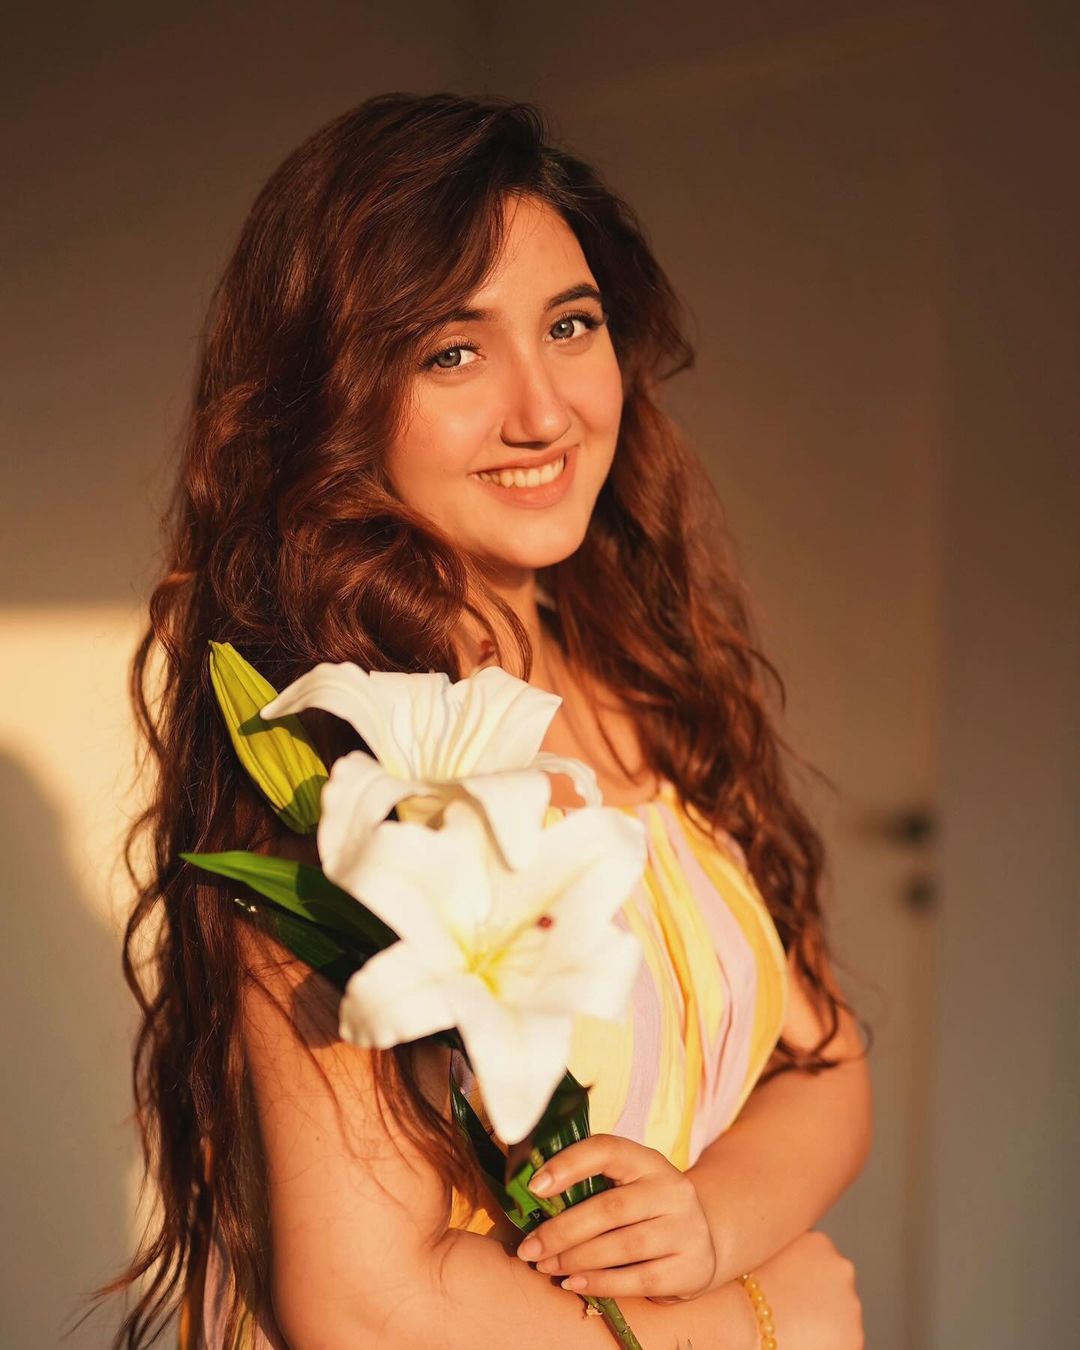 Exciting Comeback! Gorgeous Actress Ashnoor Kaur Confirms Her Return To Showbiz With School Friends Season 3!